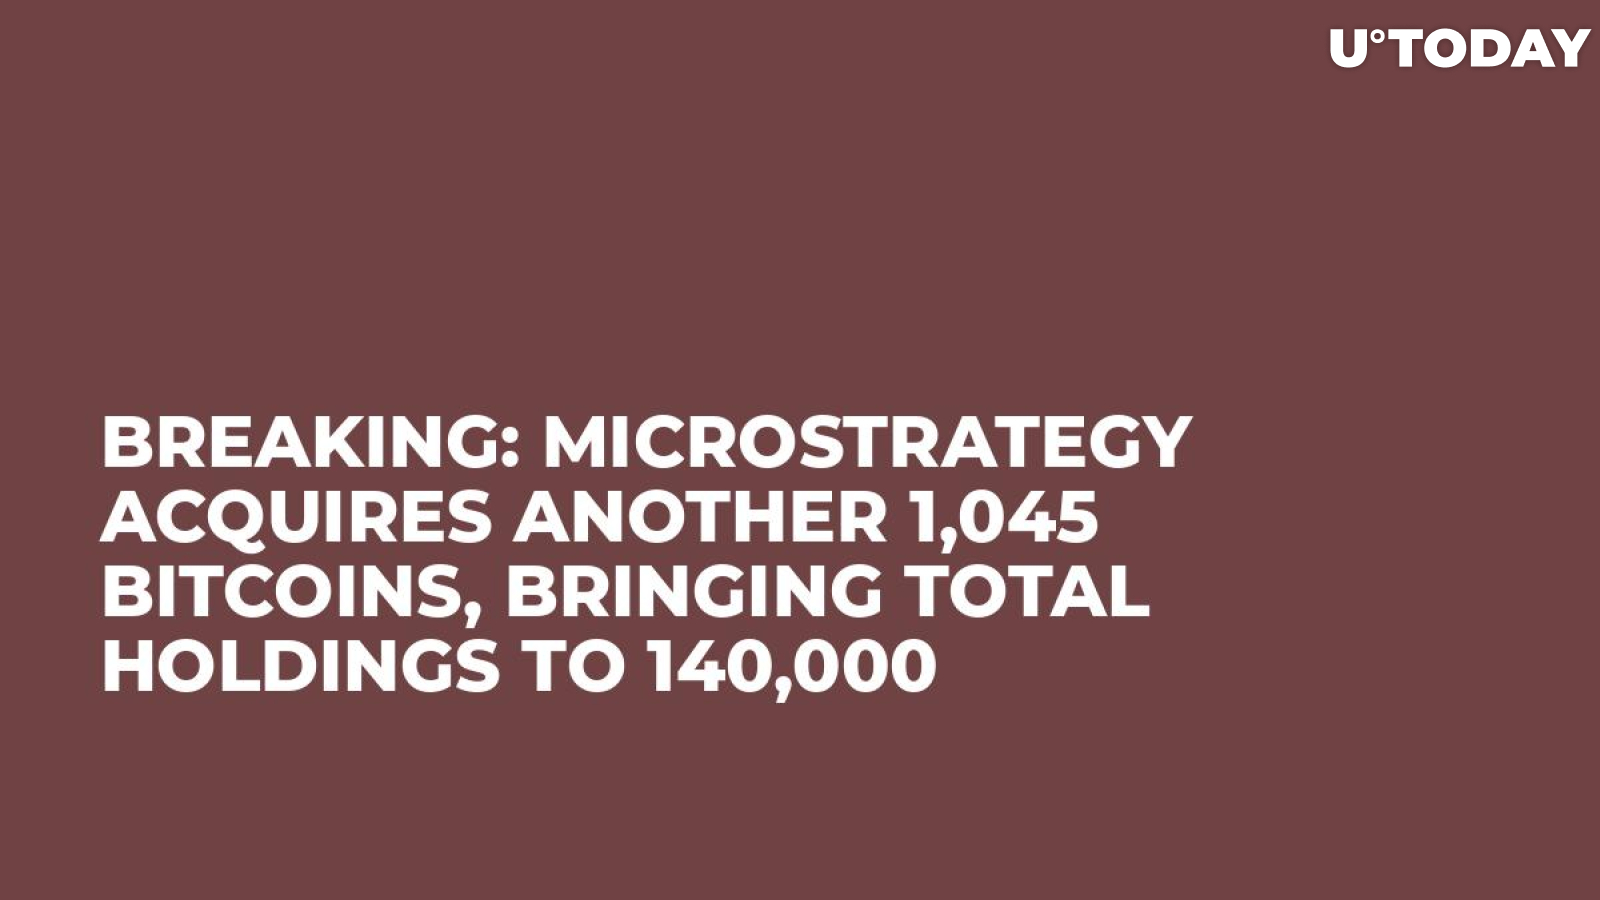 Breaking: MicroStrategy Acquires Another 1,045 Bitcoins, Bringing Total Holdings to 140,000